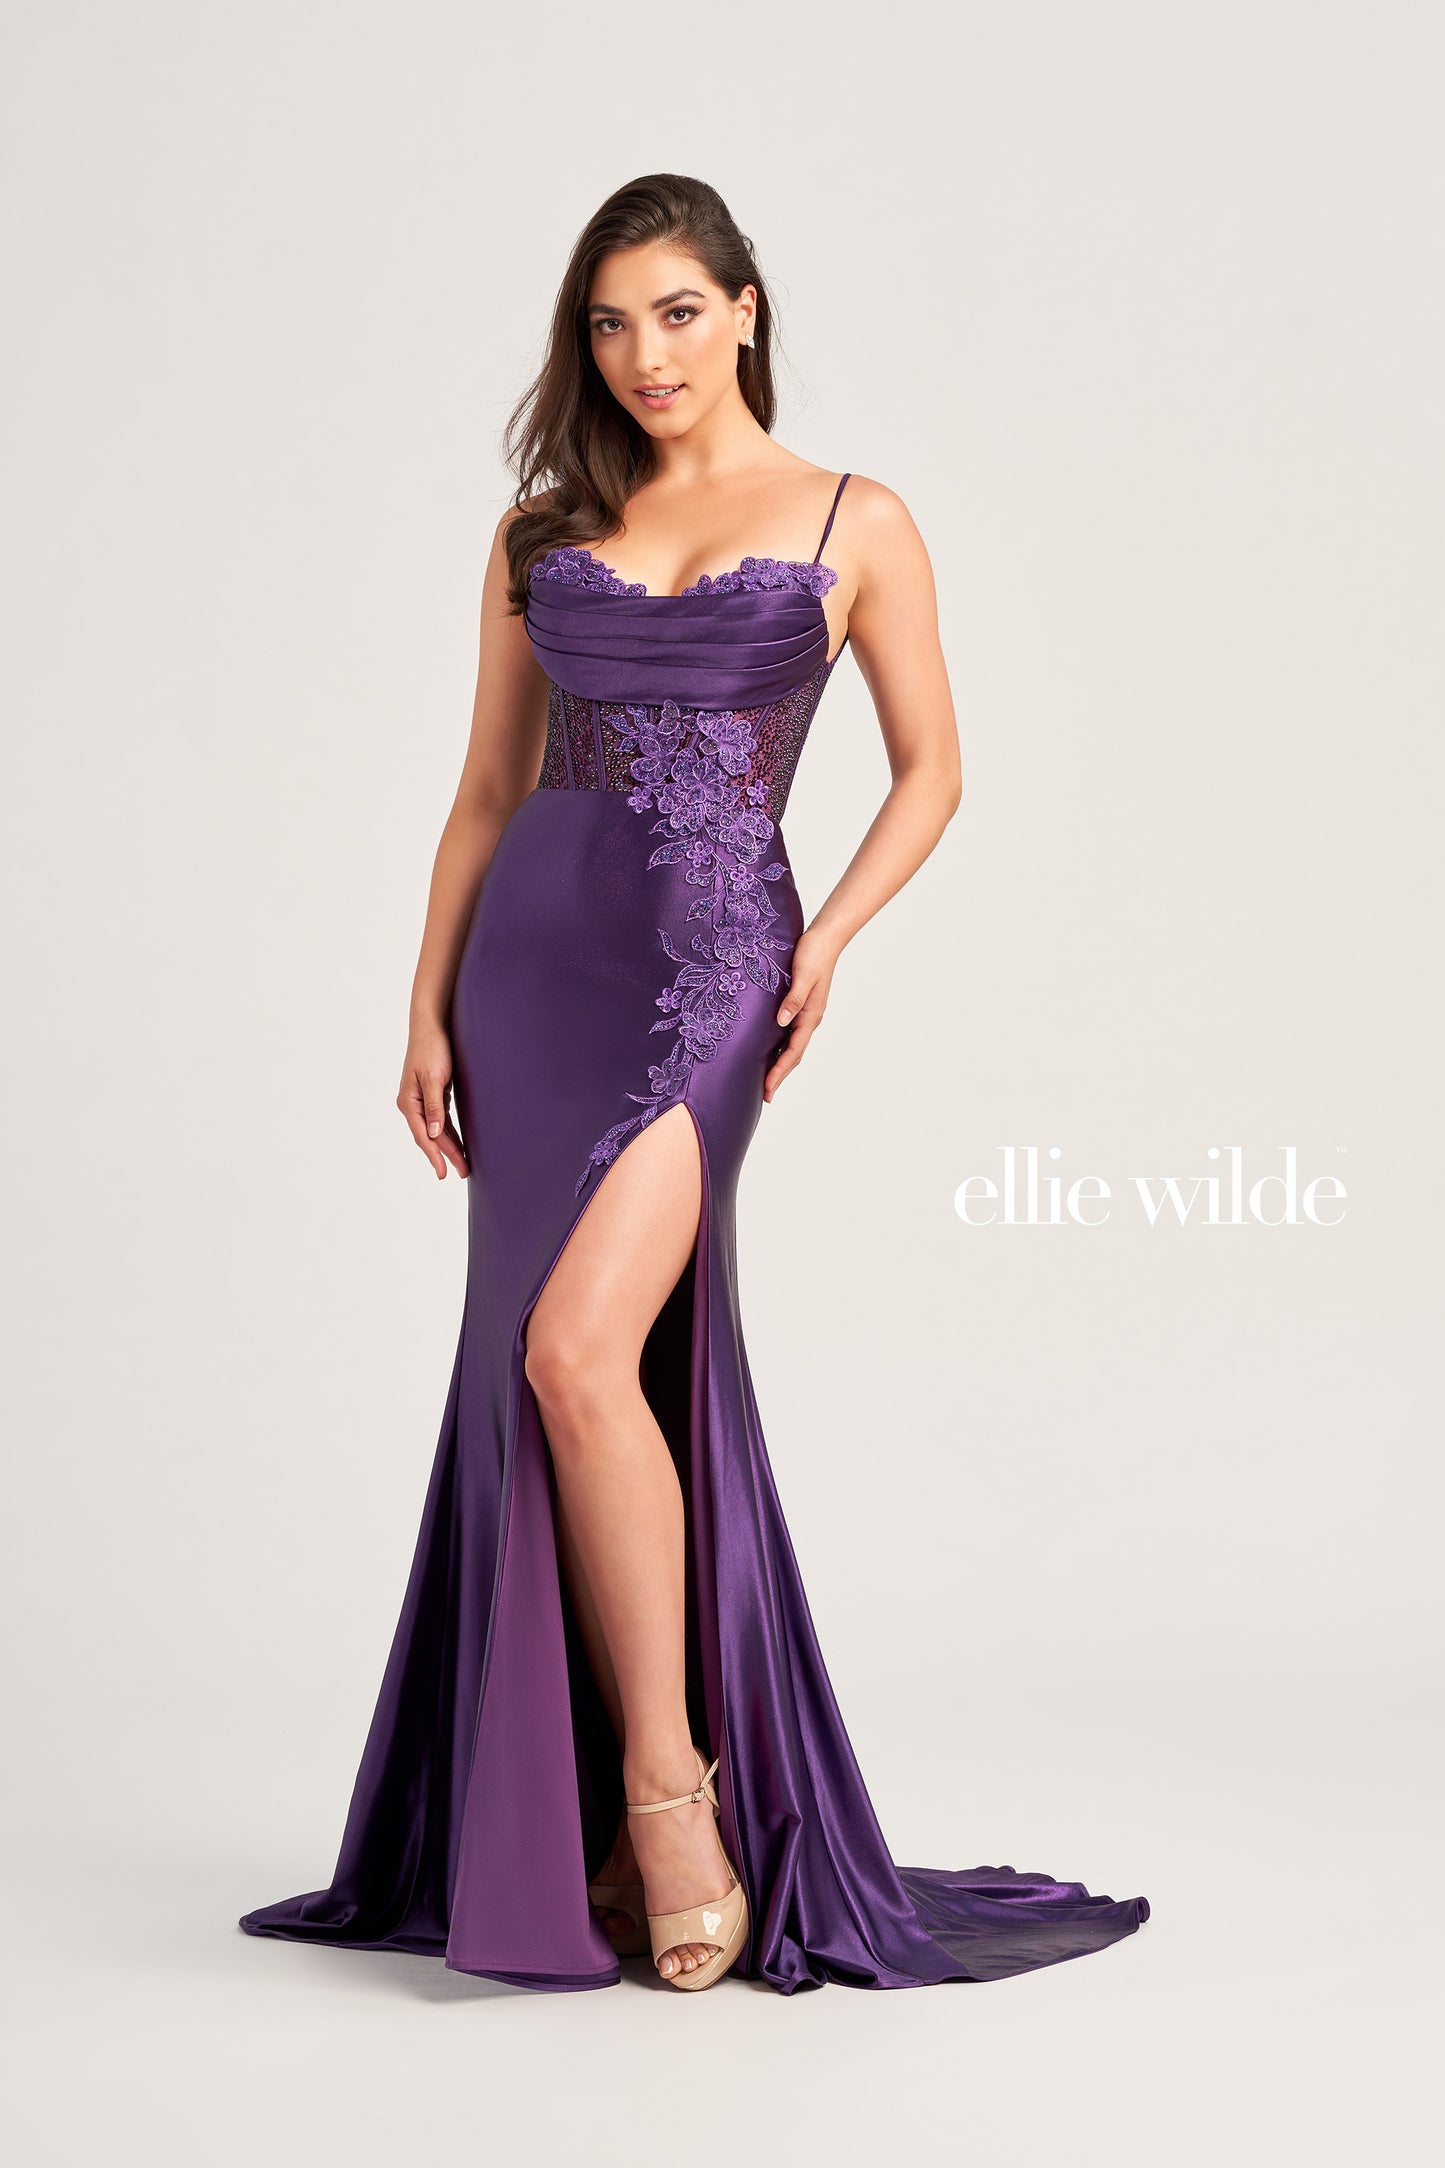 Look and feel your best in the Ellie Wilde EW35028 Long Sheer Corset Lace Formal Dress. This ultra-flattering evening gown features an alluring sweetheart neckline with lace choker detail, corset bodice, and a fit and flare silhouette, enhanced by lace appliques and stone accents. The luxe stretch satin jersey drapes effortlessly and the high slit adds movement and depth. Dazzle them with your entrancing look and effortless style.  COLOR: BLACK, RED, EMERALD, DARK PURPLE SIZE: 00 - 20